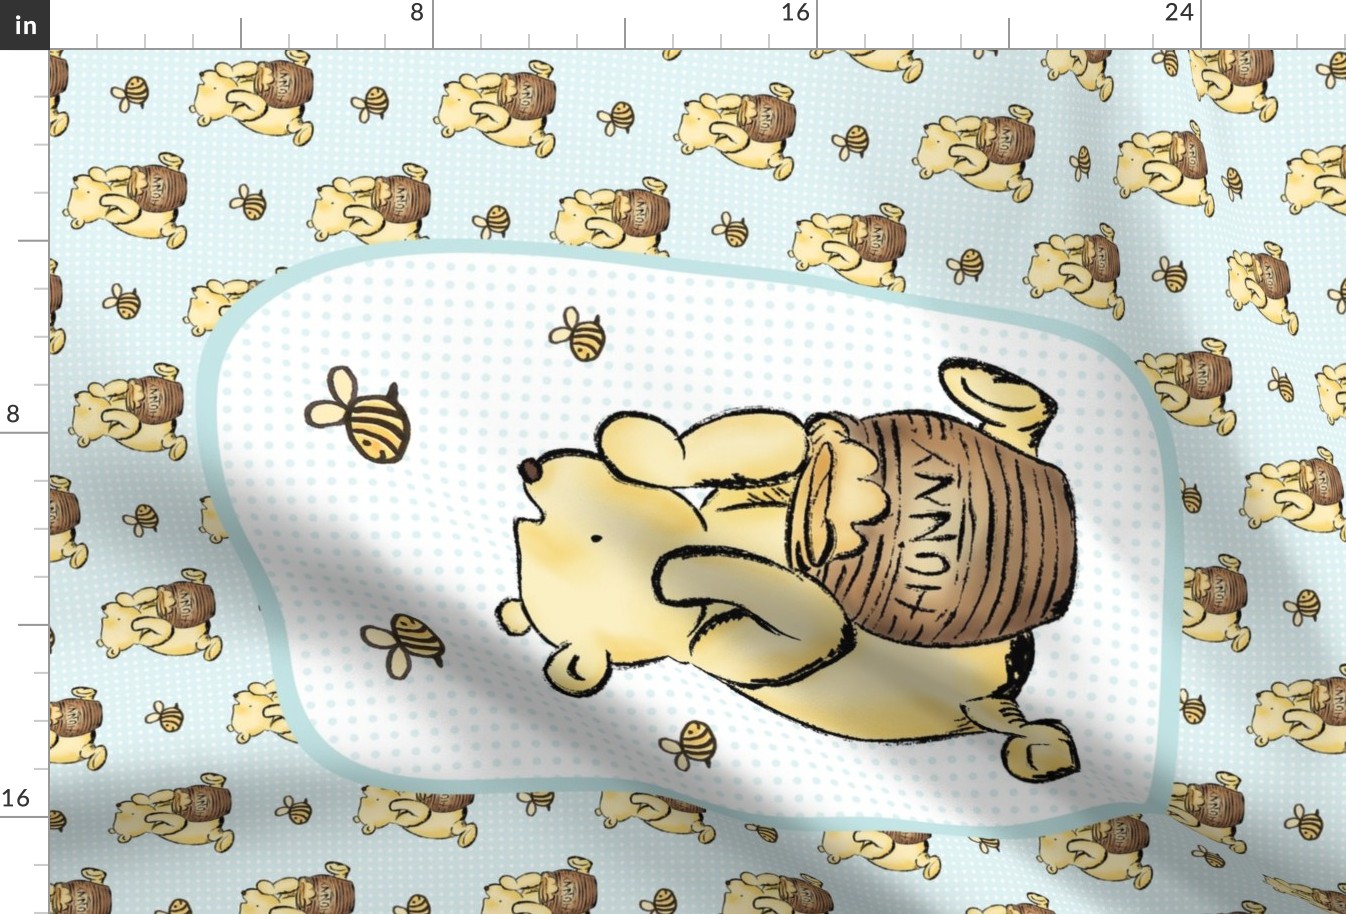 Large 27x18 Fat Quarter Panel Classic Winnie The Pooh Hunny Pot on Pale Blue for Wall Hanging or Tea Towel